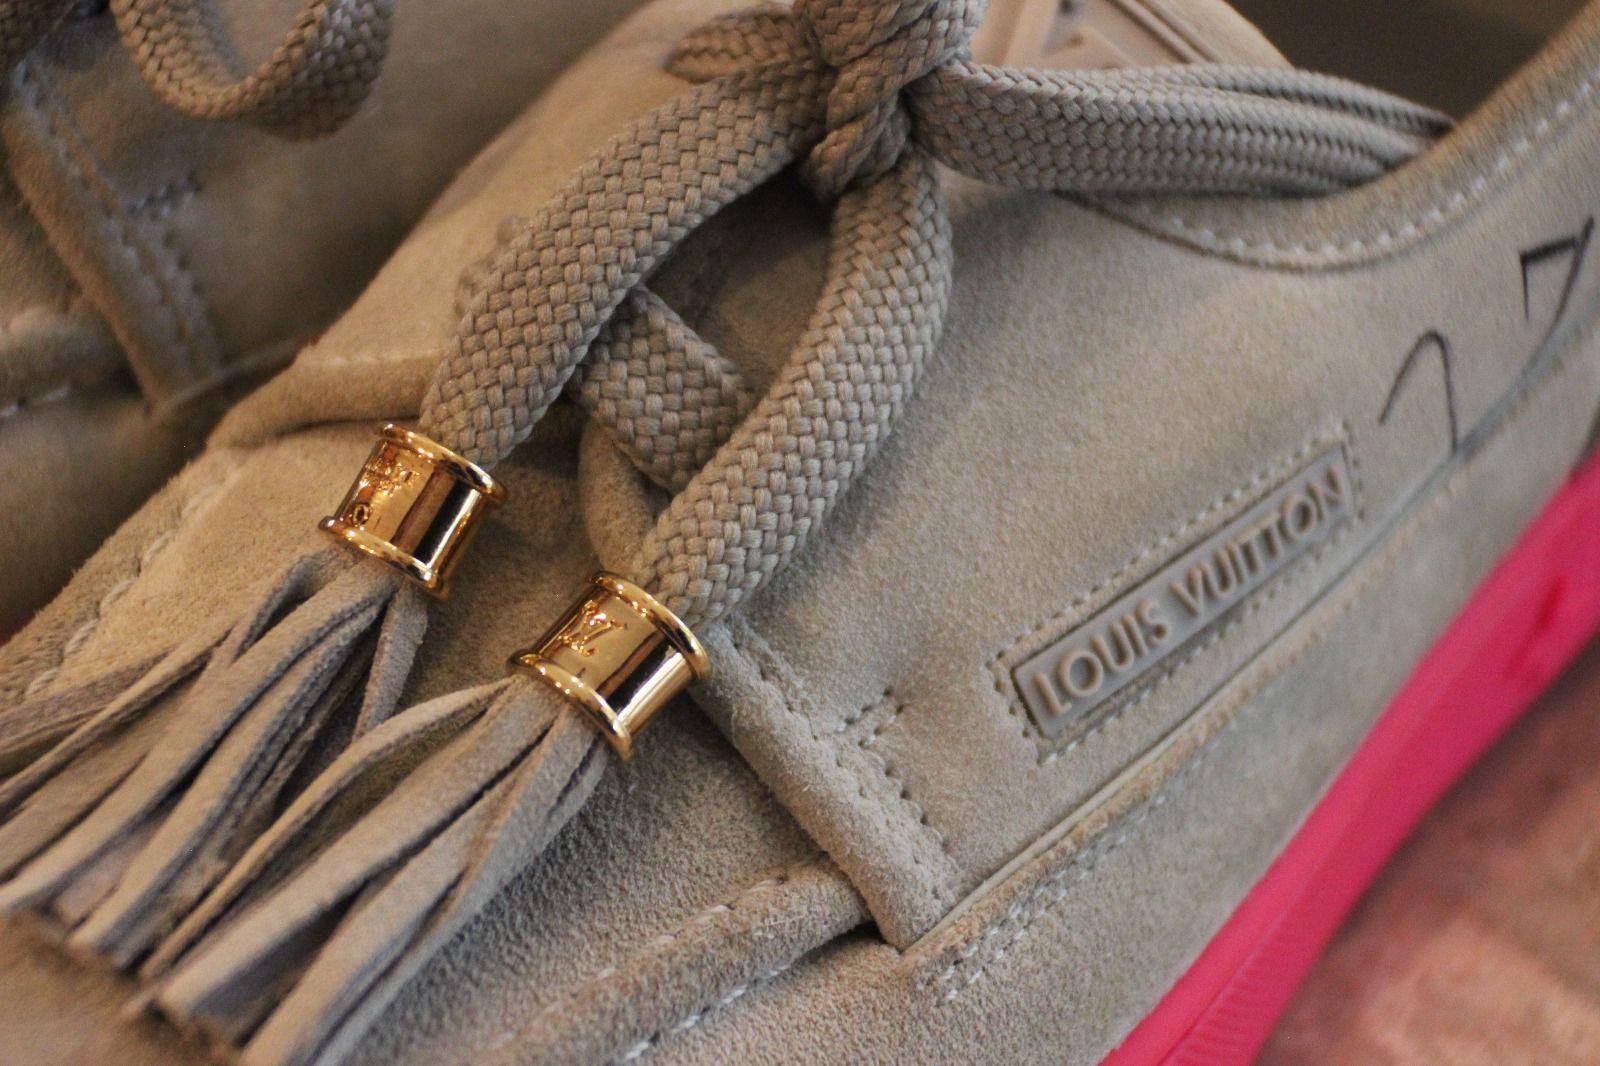 Kanye West x Louis Vuitton “Mr. Hudson” sneakers, signed by Mr